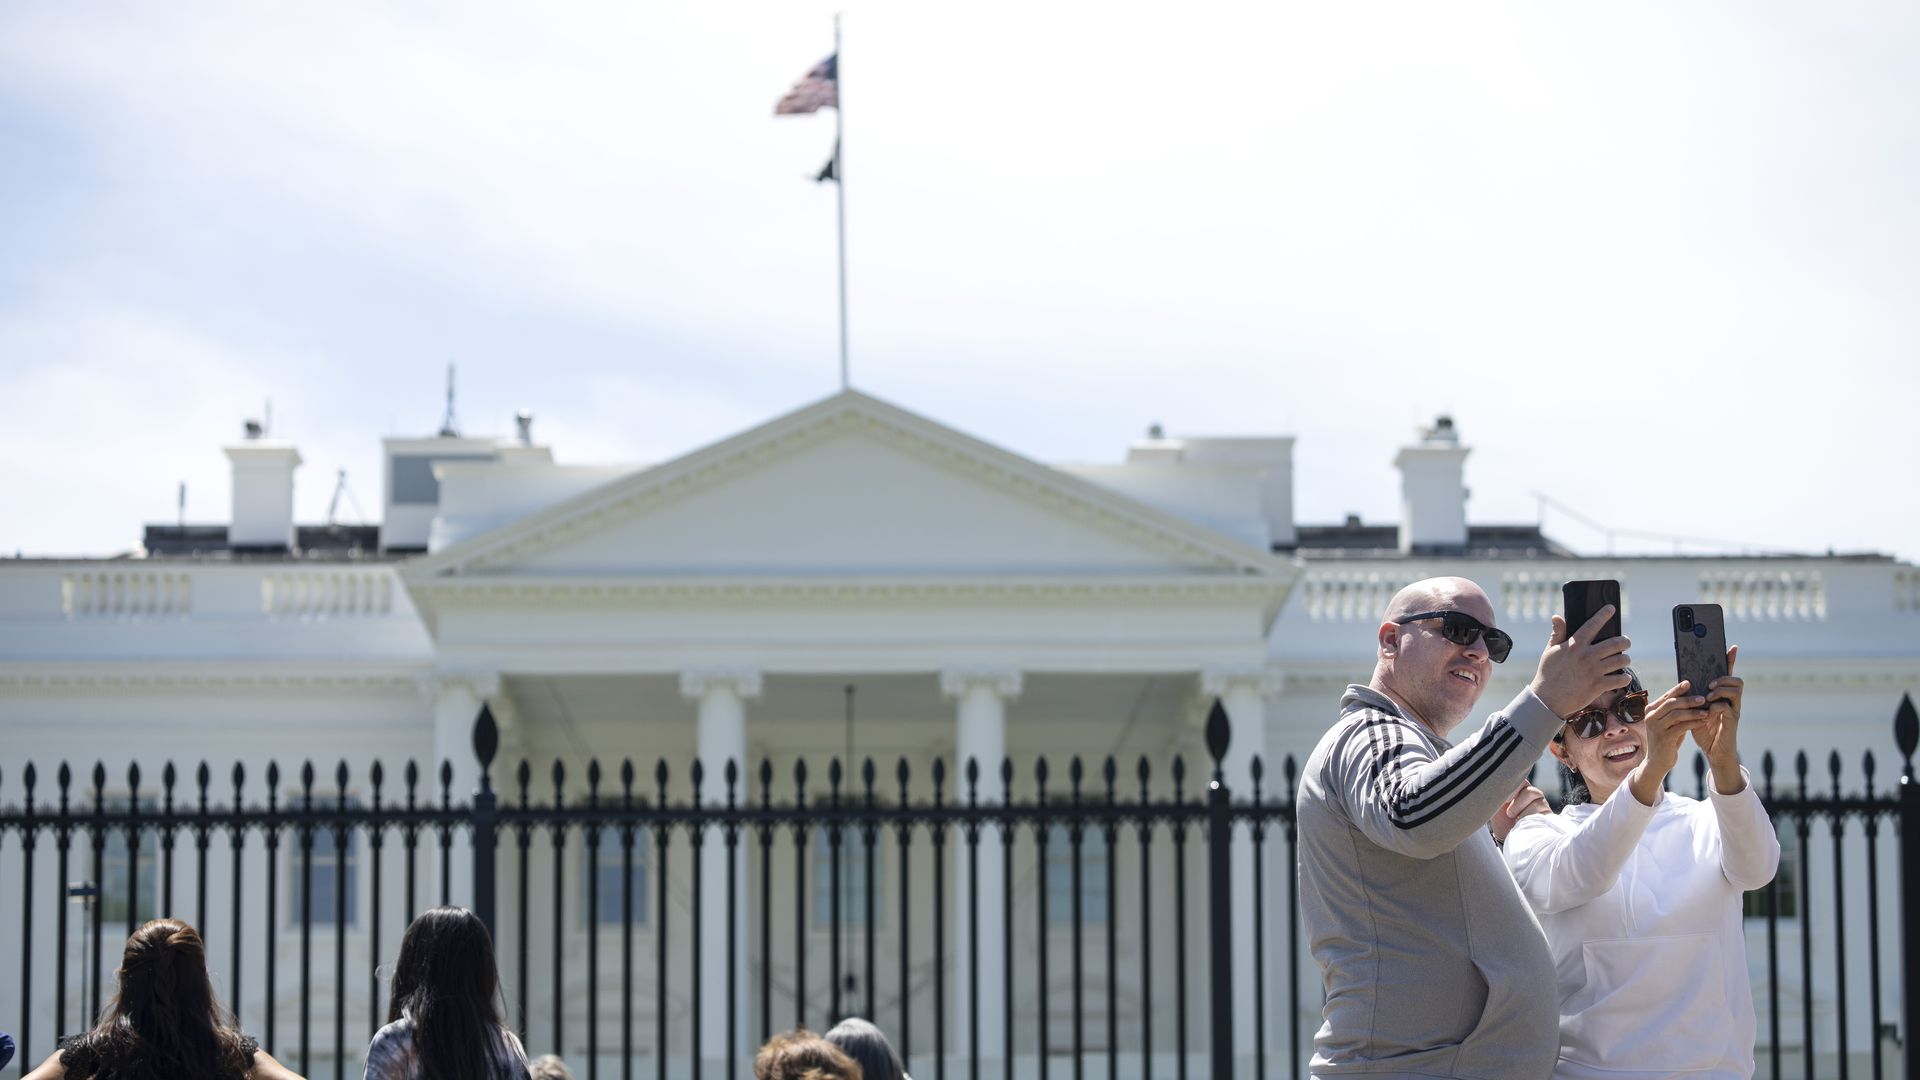 Tourists are seen snapping a selfie in front of the White House.